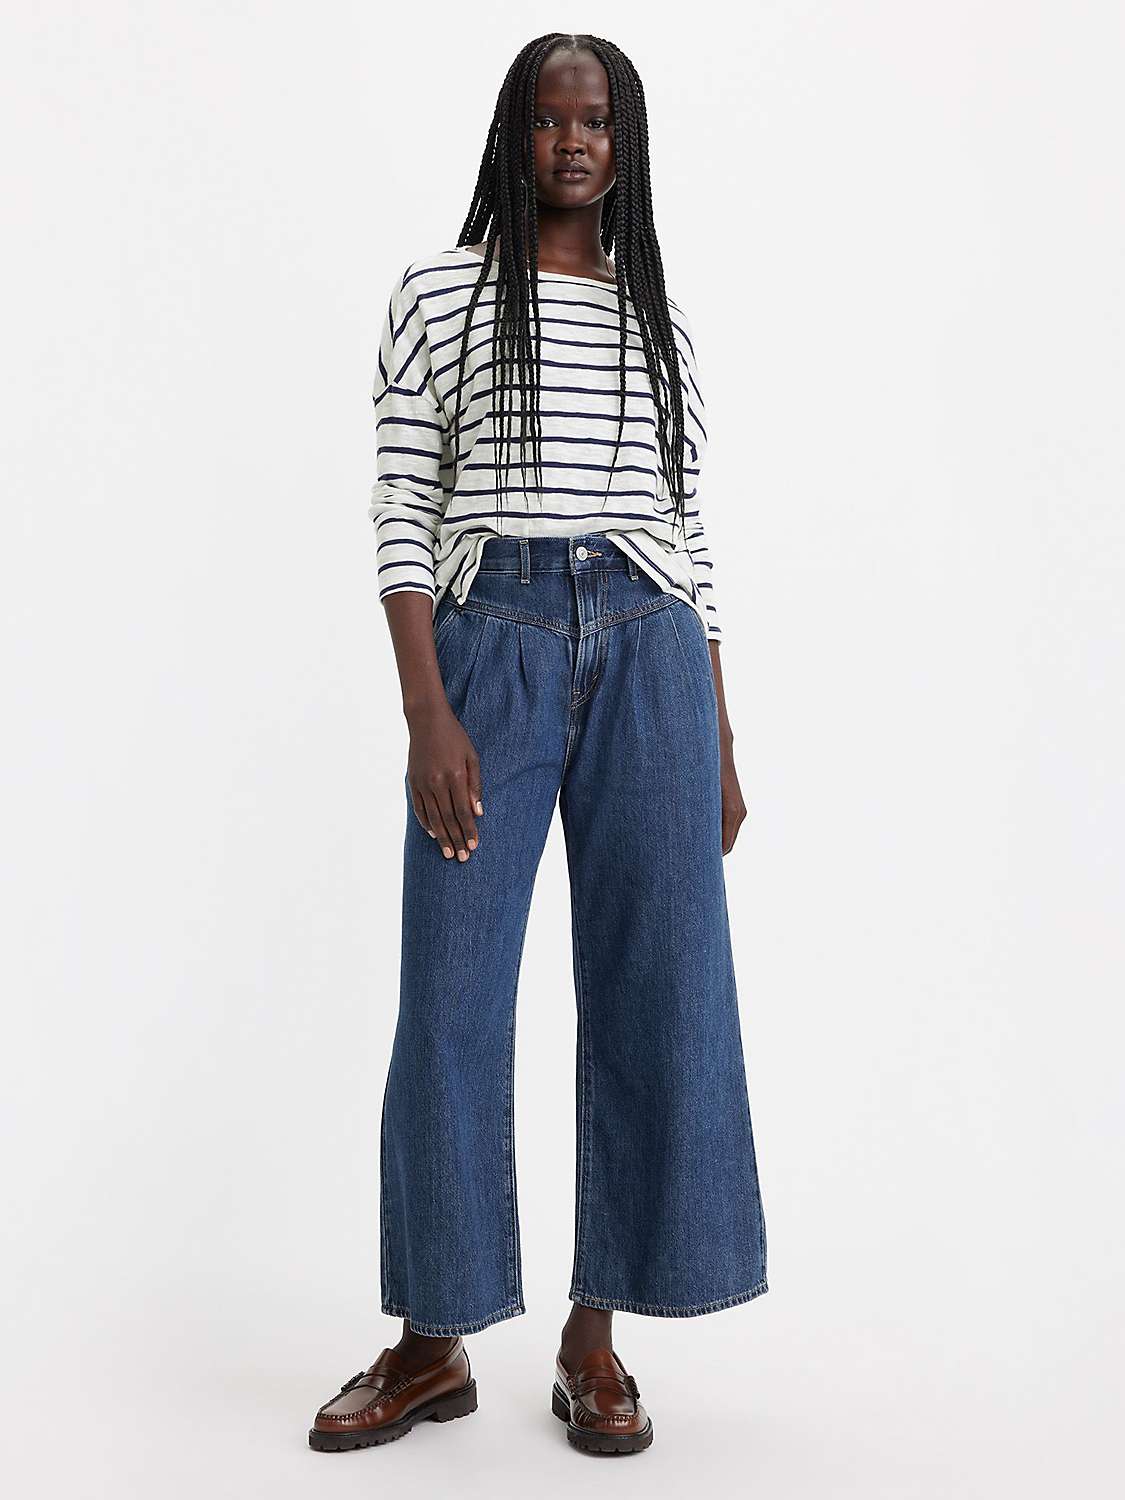 Buy Levi's Featherweight Baggy Jeans, Paper Map Online at johnlewis.com